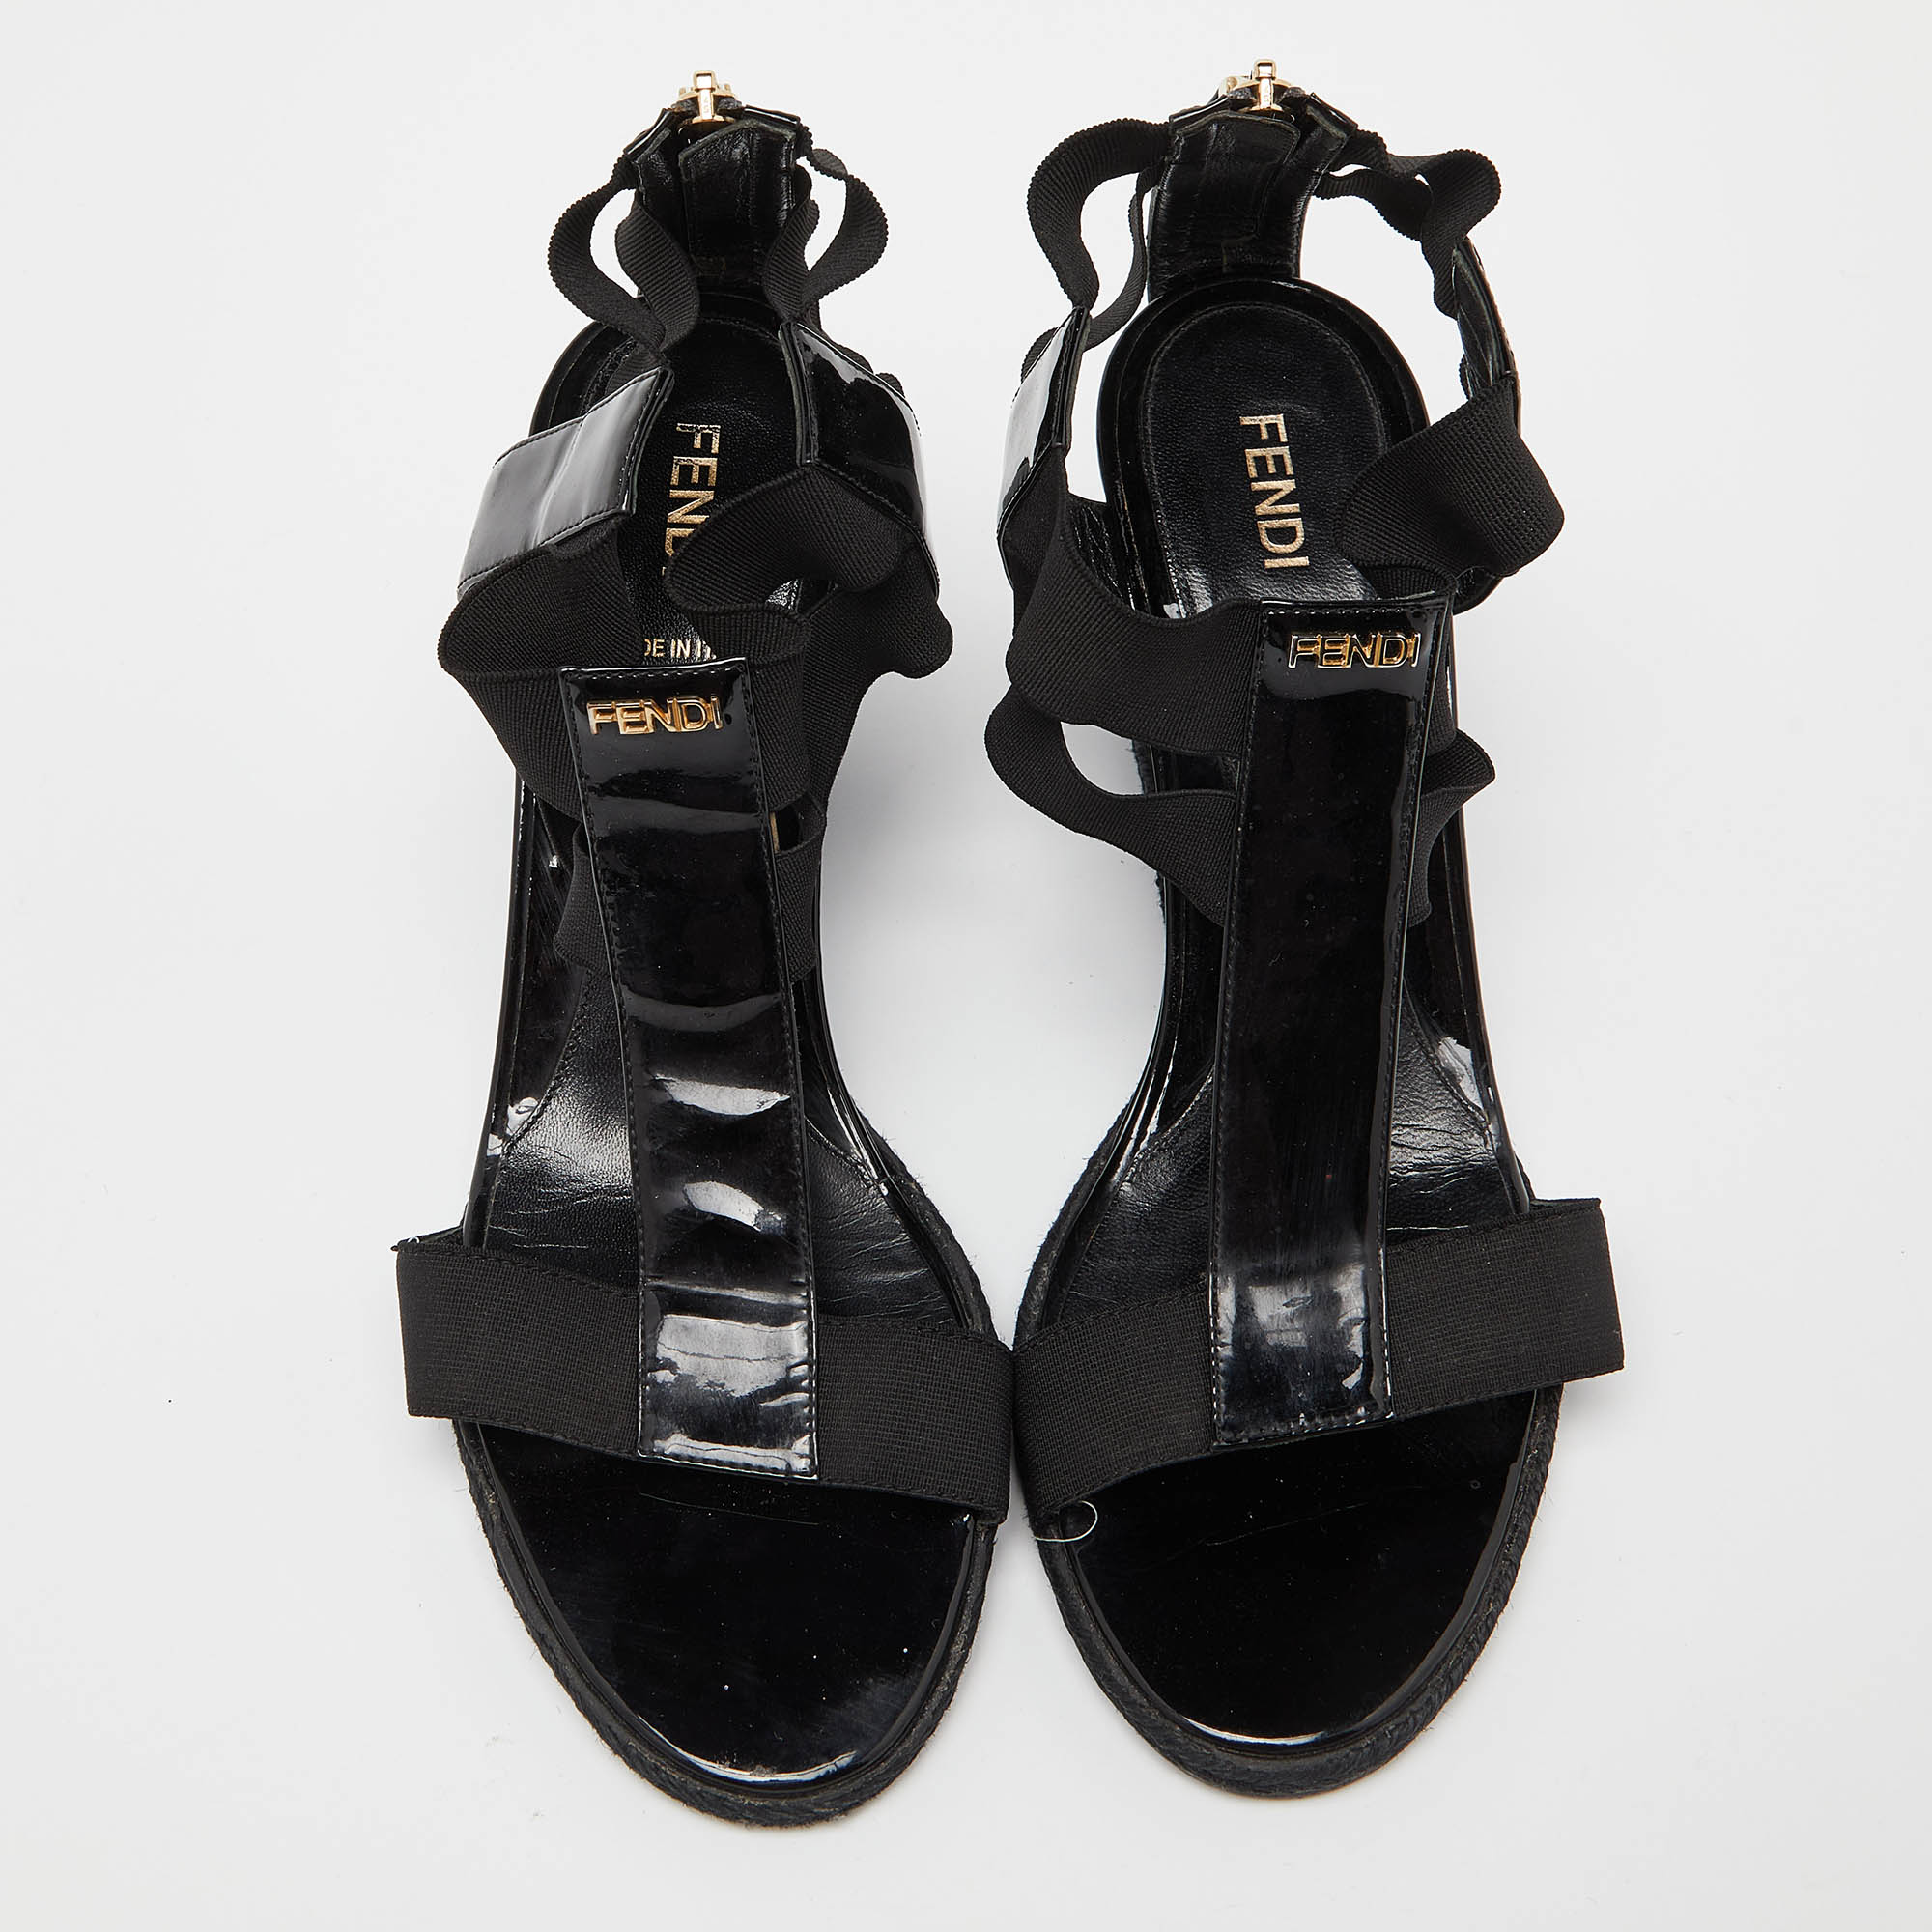 Fendi Black Patent Leather Ankle Strap Wedge Sandals Size 38